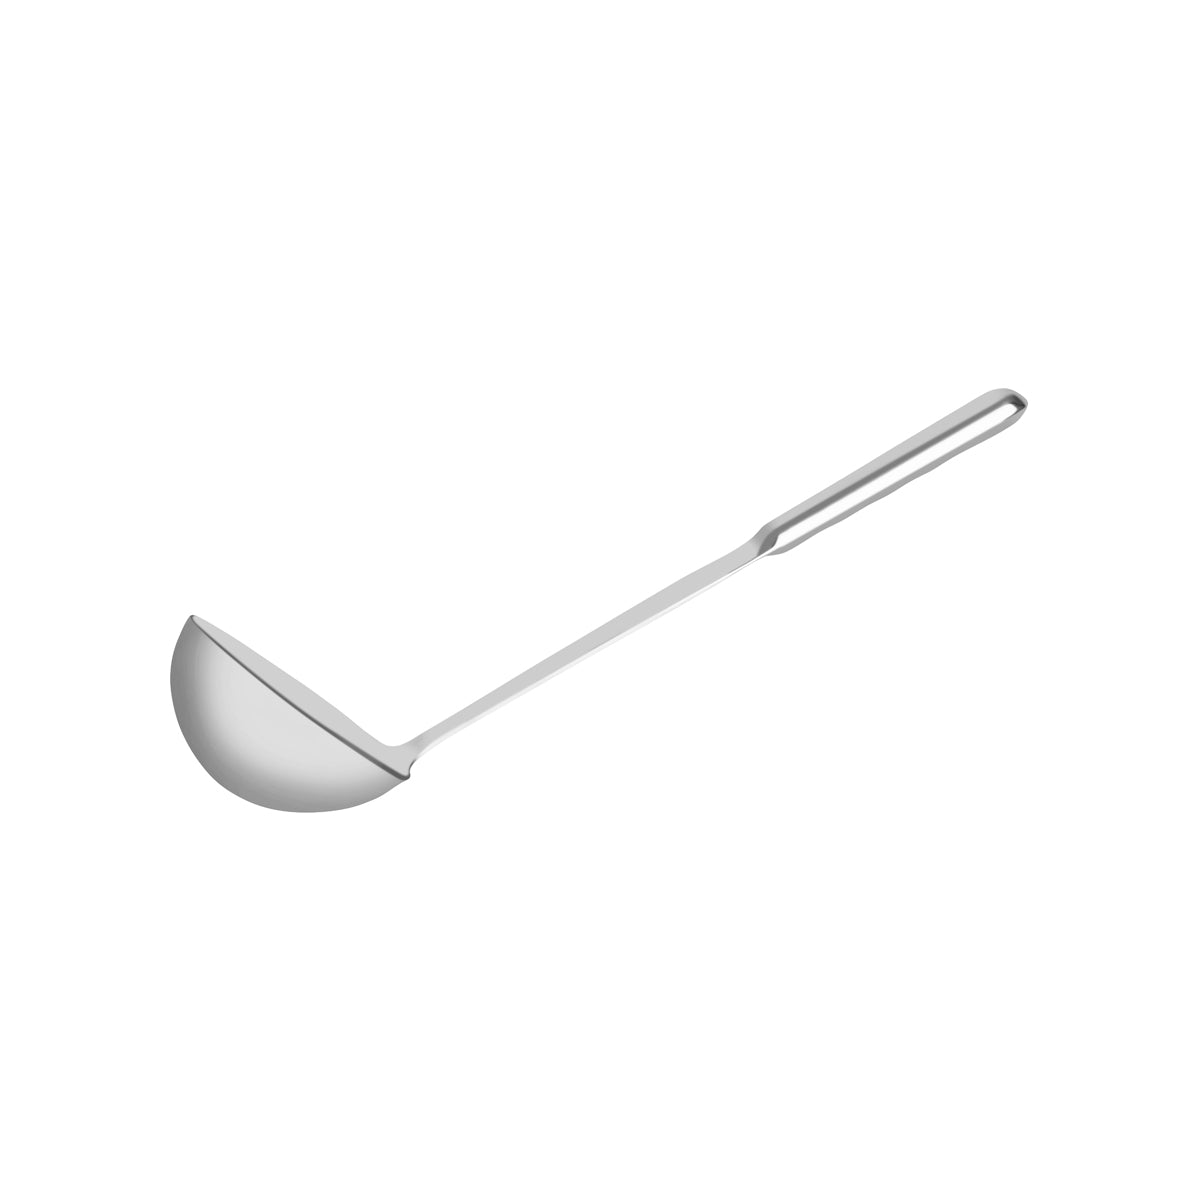 '03592 Chef Inox Soup Ladle Hollow Handle Stainless Steel 338mm / 120ml Tomkin Australia Hospitality Supplies